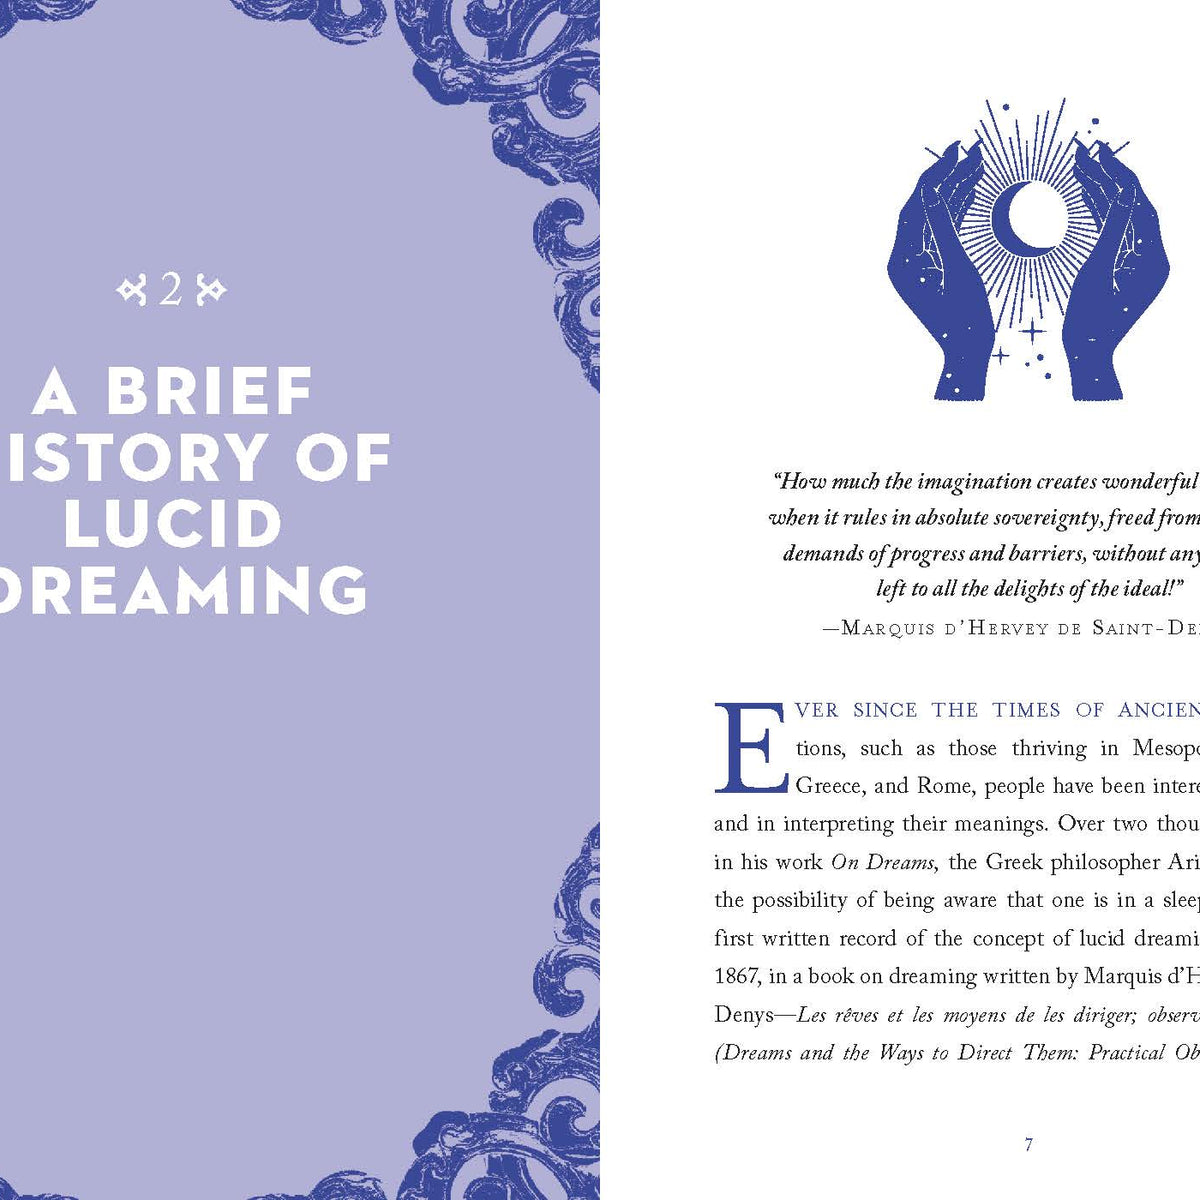 A Little Bit of Lucid Dreaming by Cyrena Lee